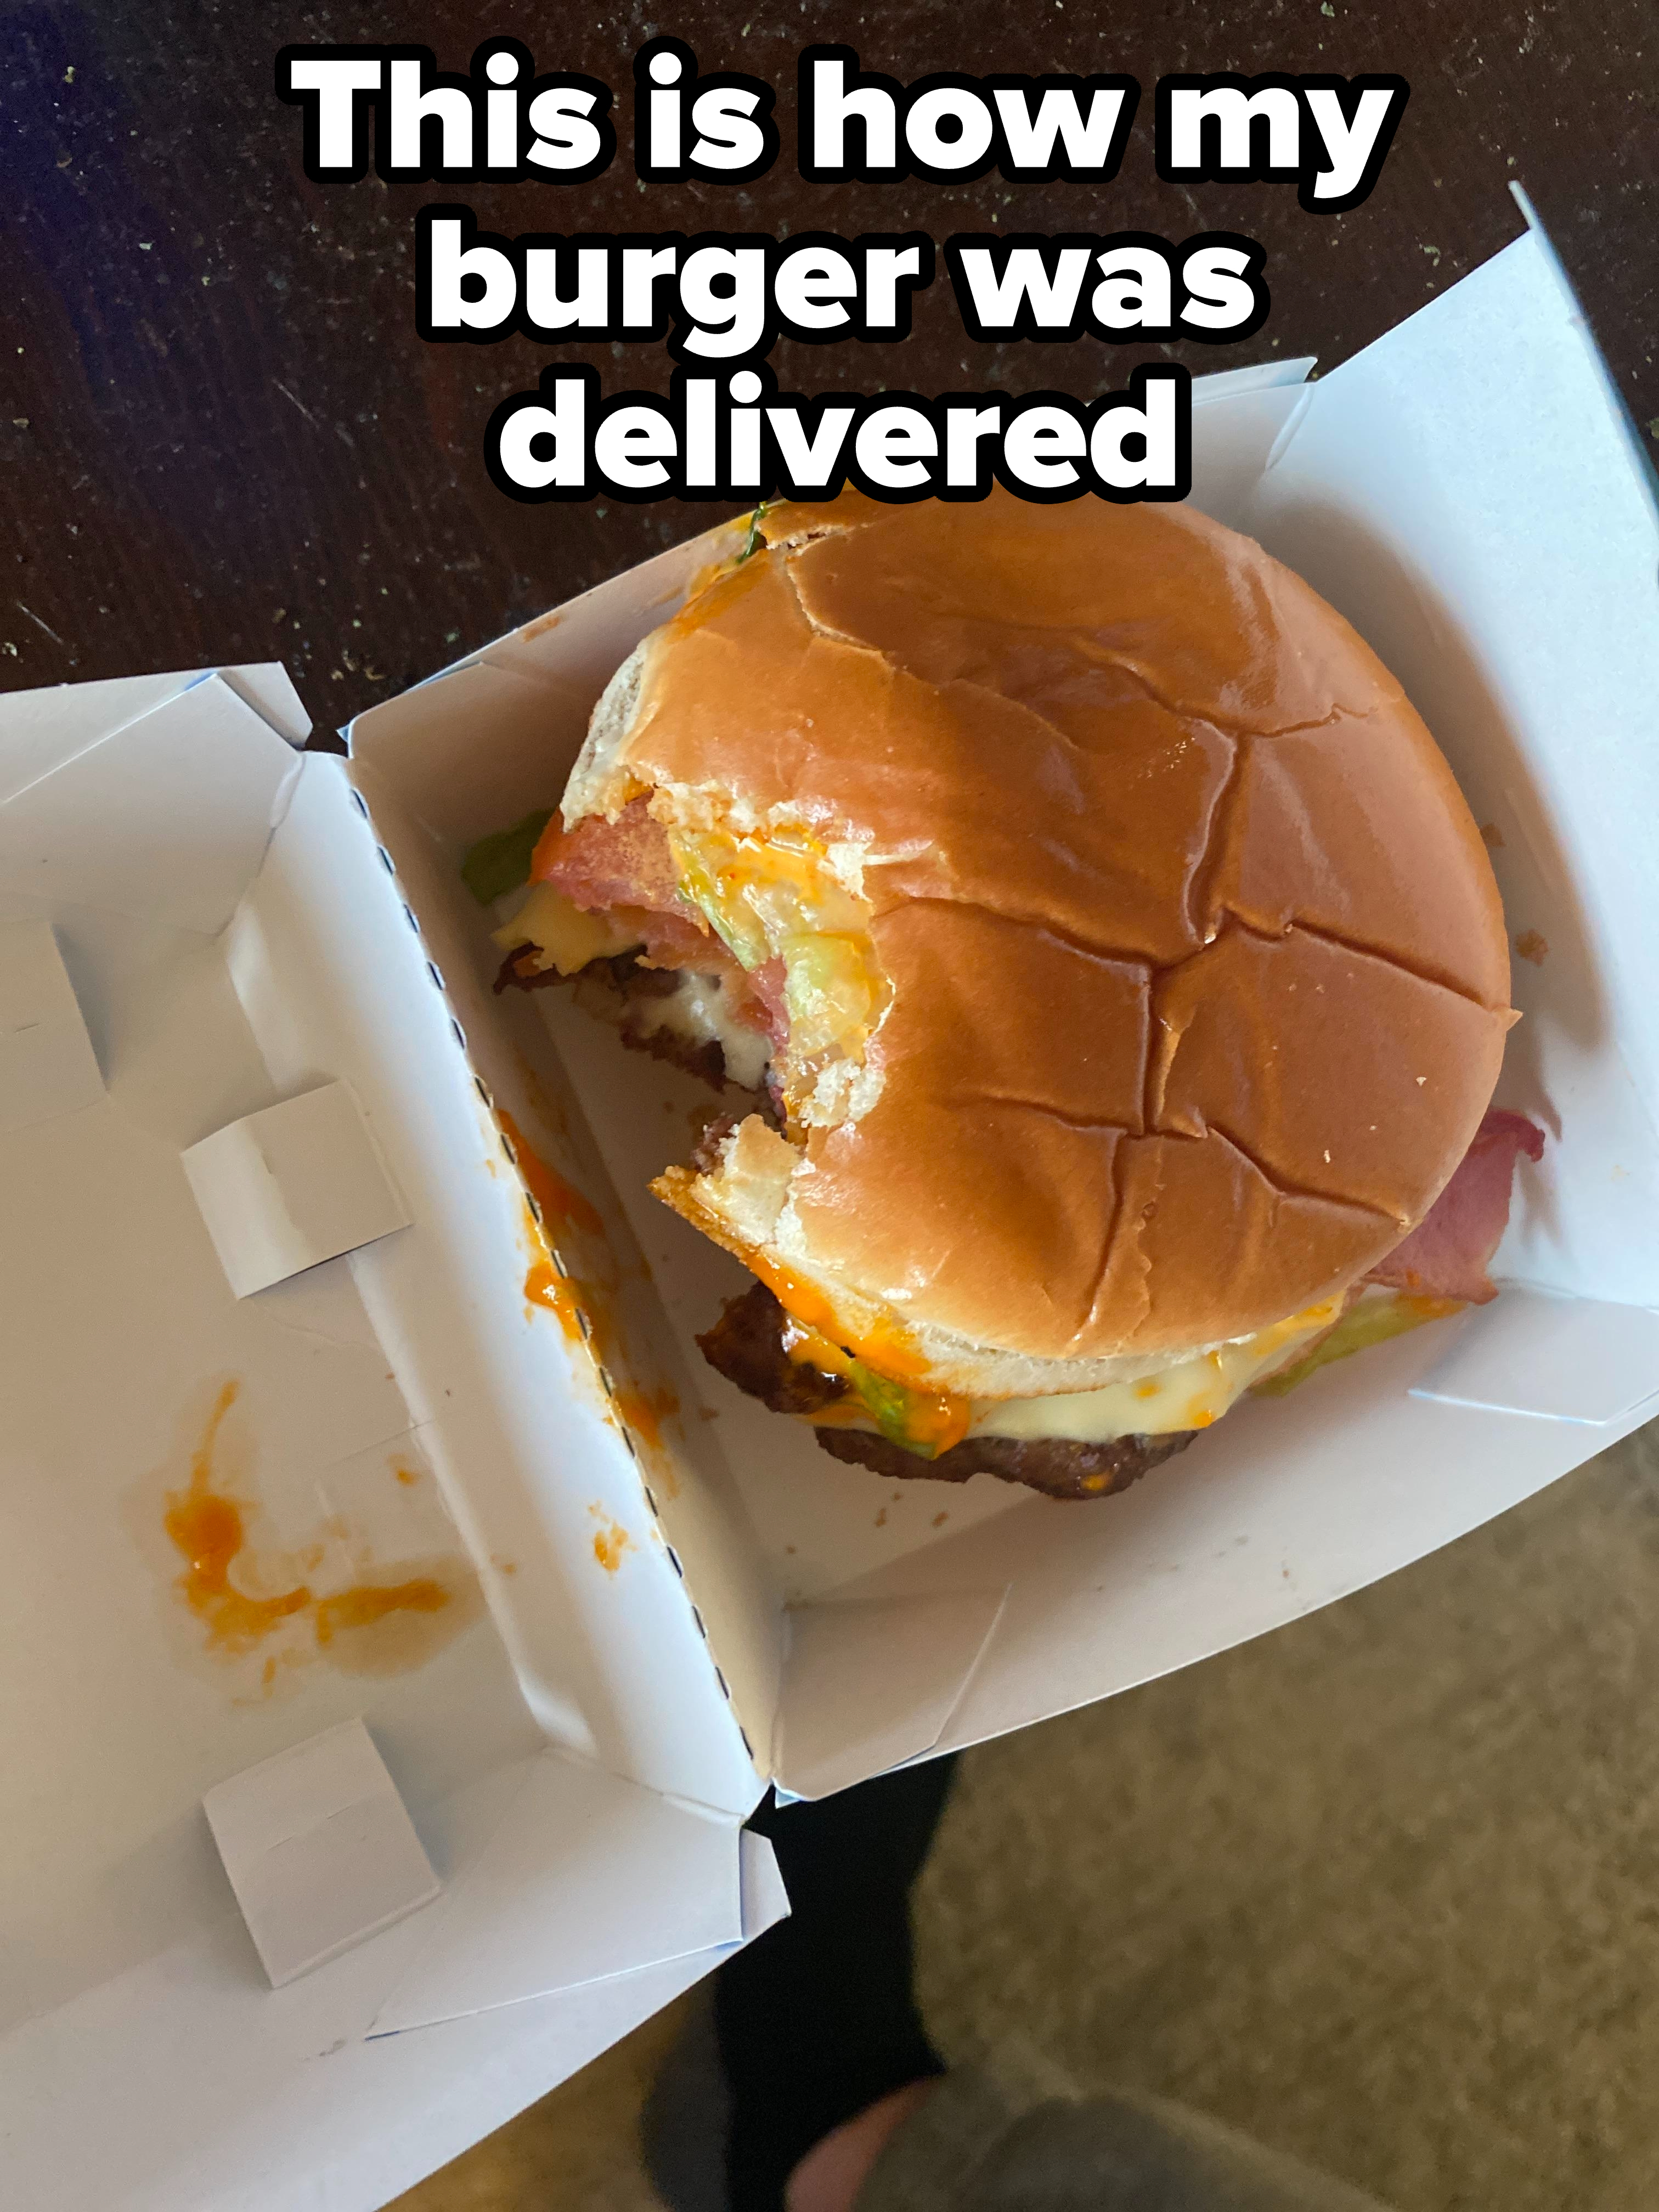 Partially eaten burger with visible condiments and fillings, in an open takeout box on a wooden surface